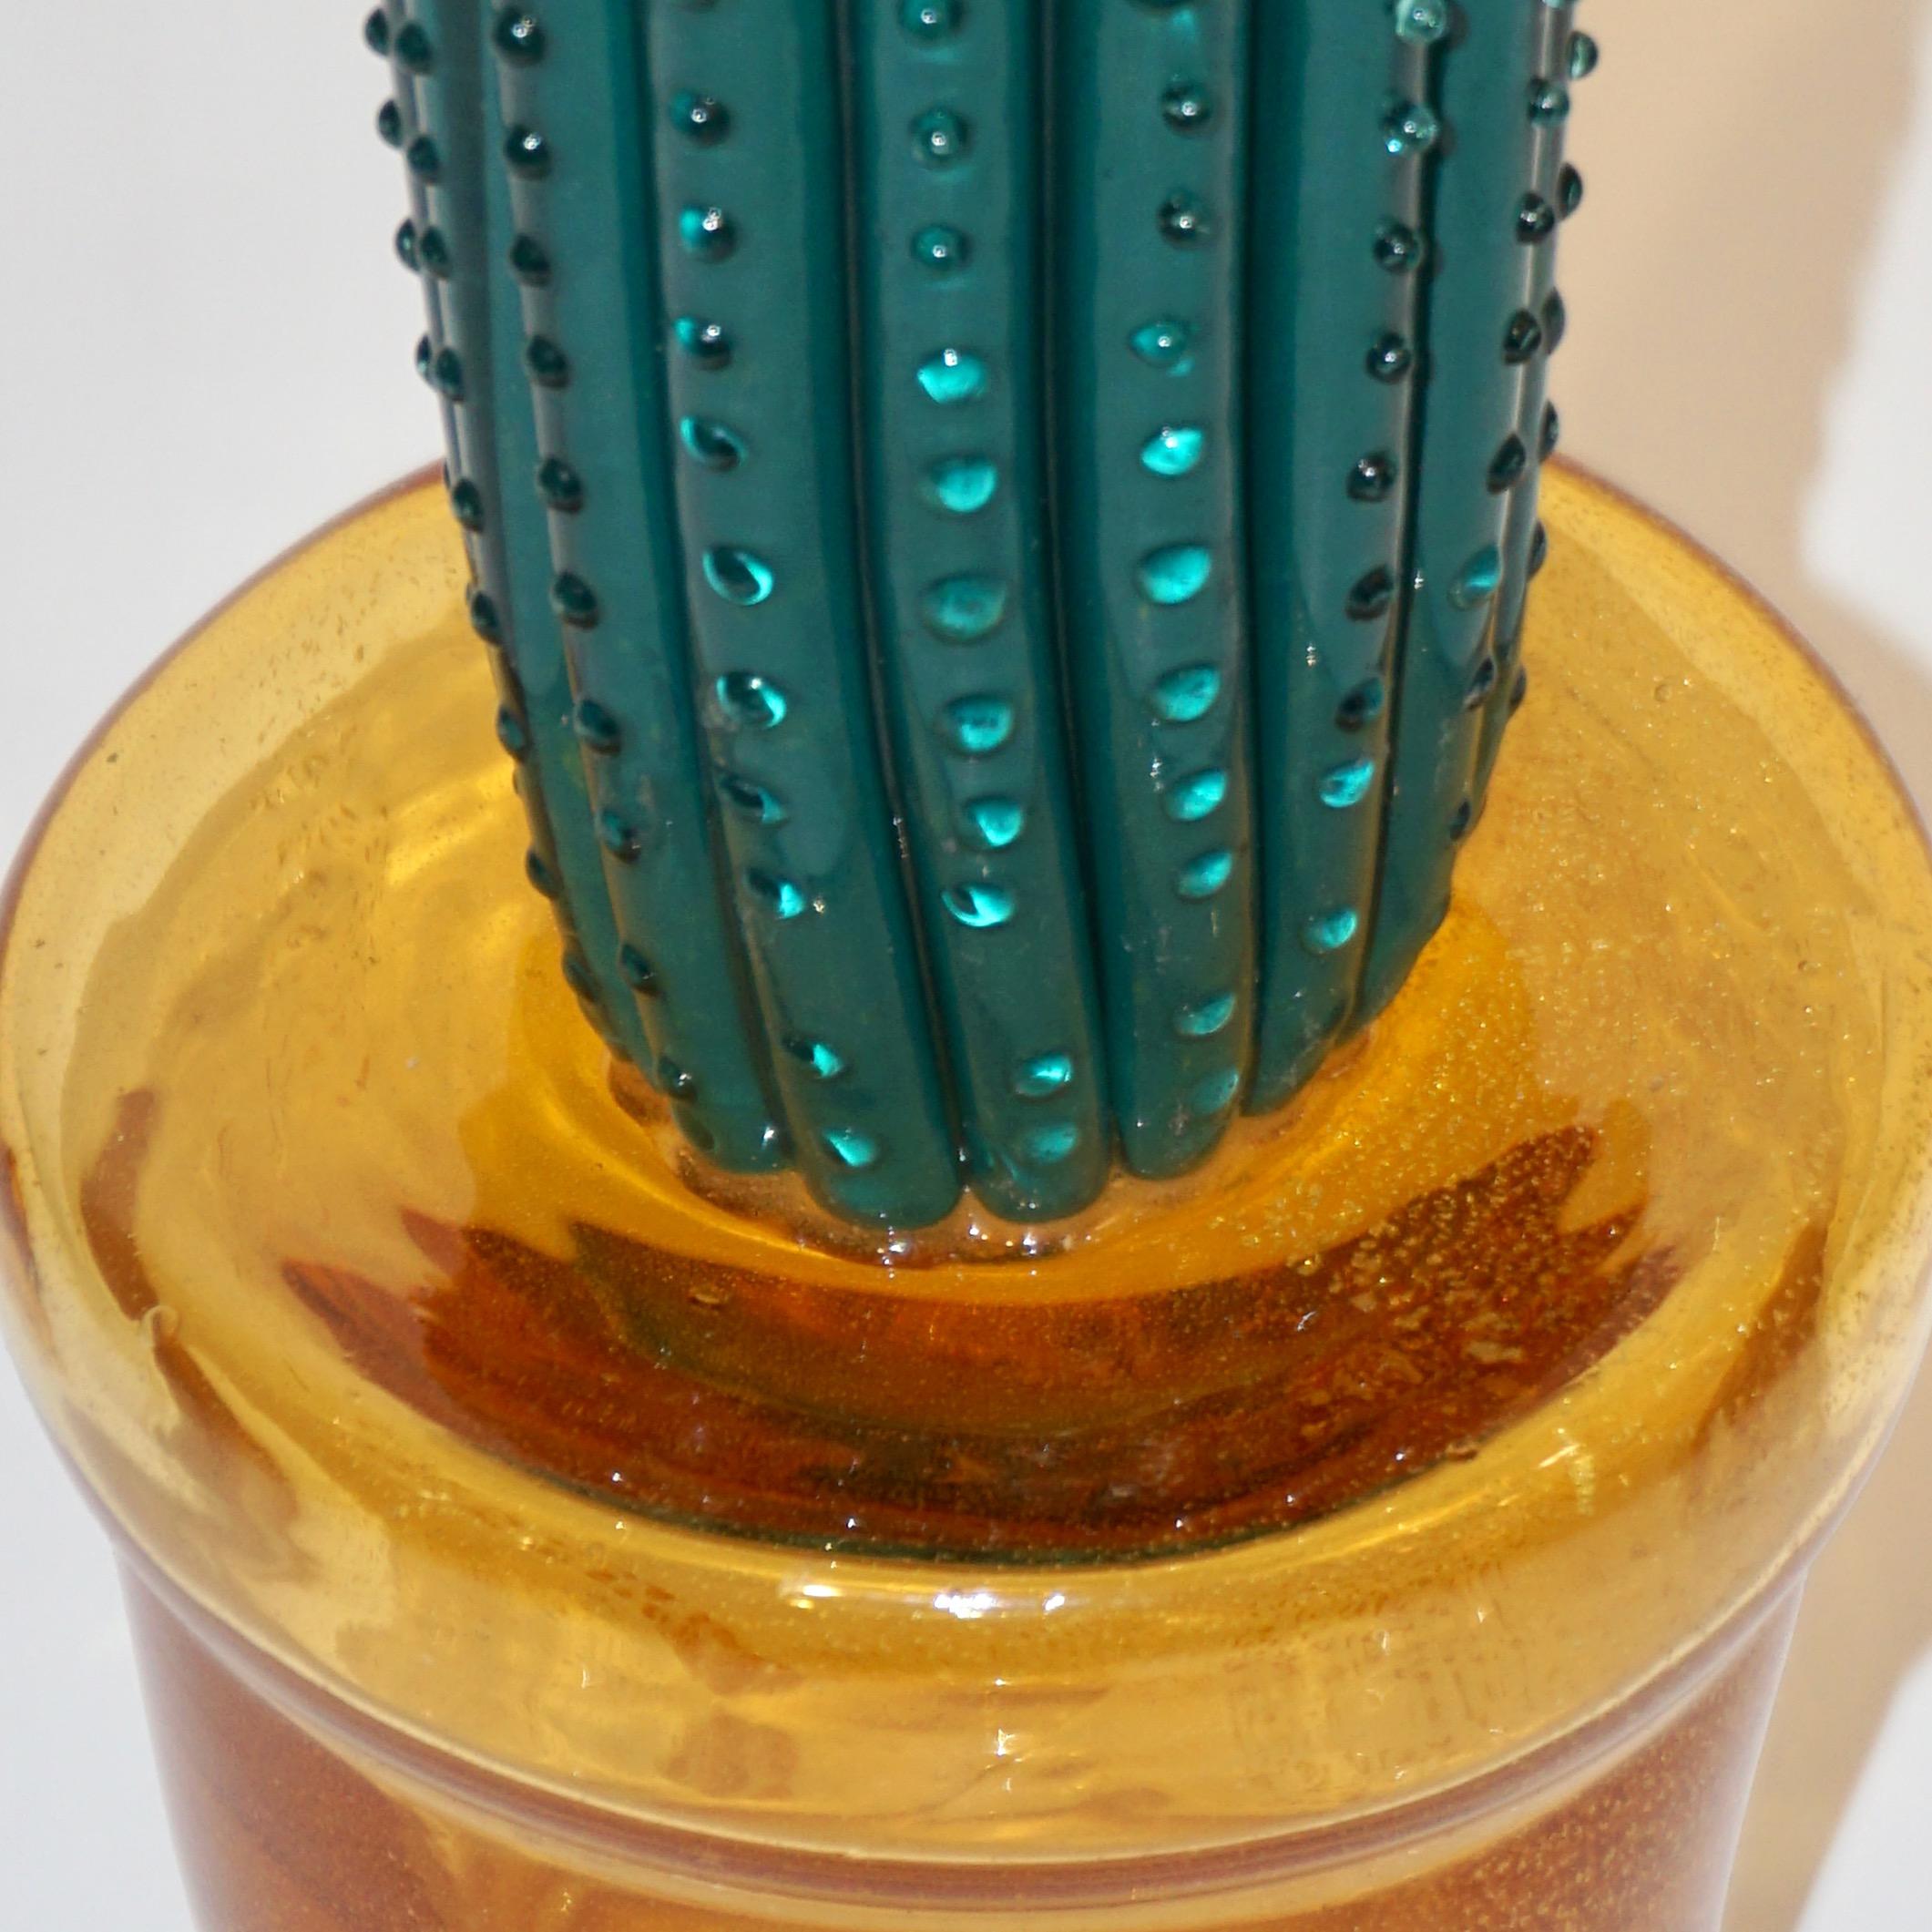 Minimalist 1990s Vintage Italian Teal Green Murano Glass Tall Cactus Plant with Gold Pot